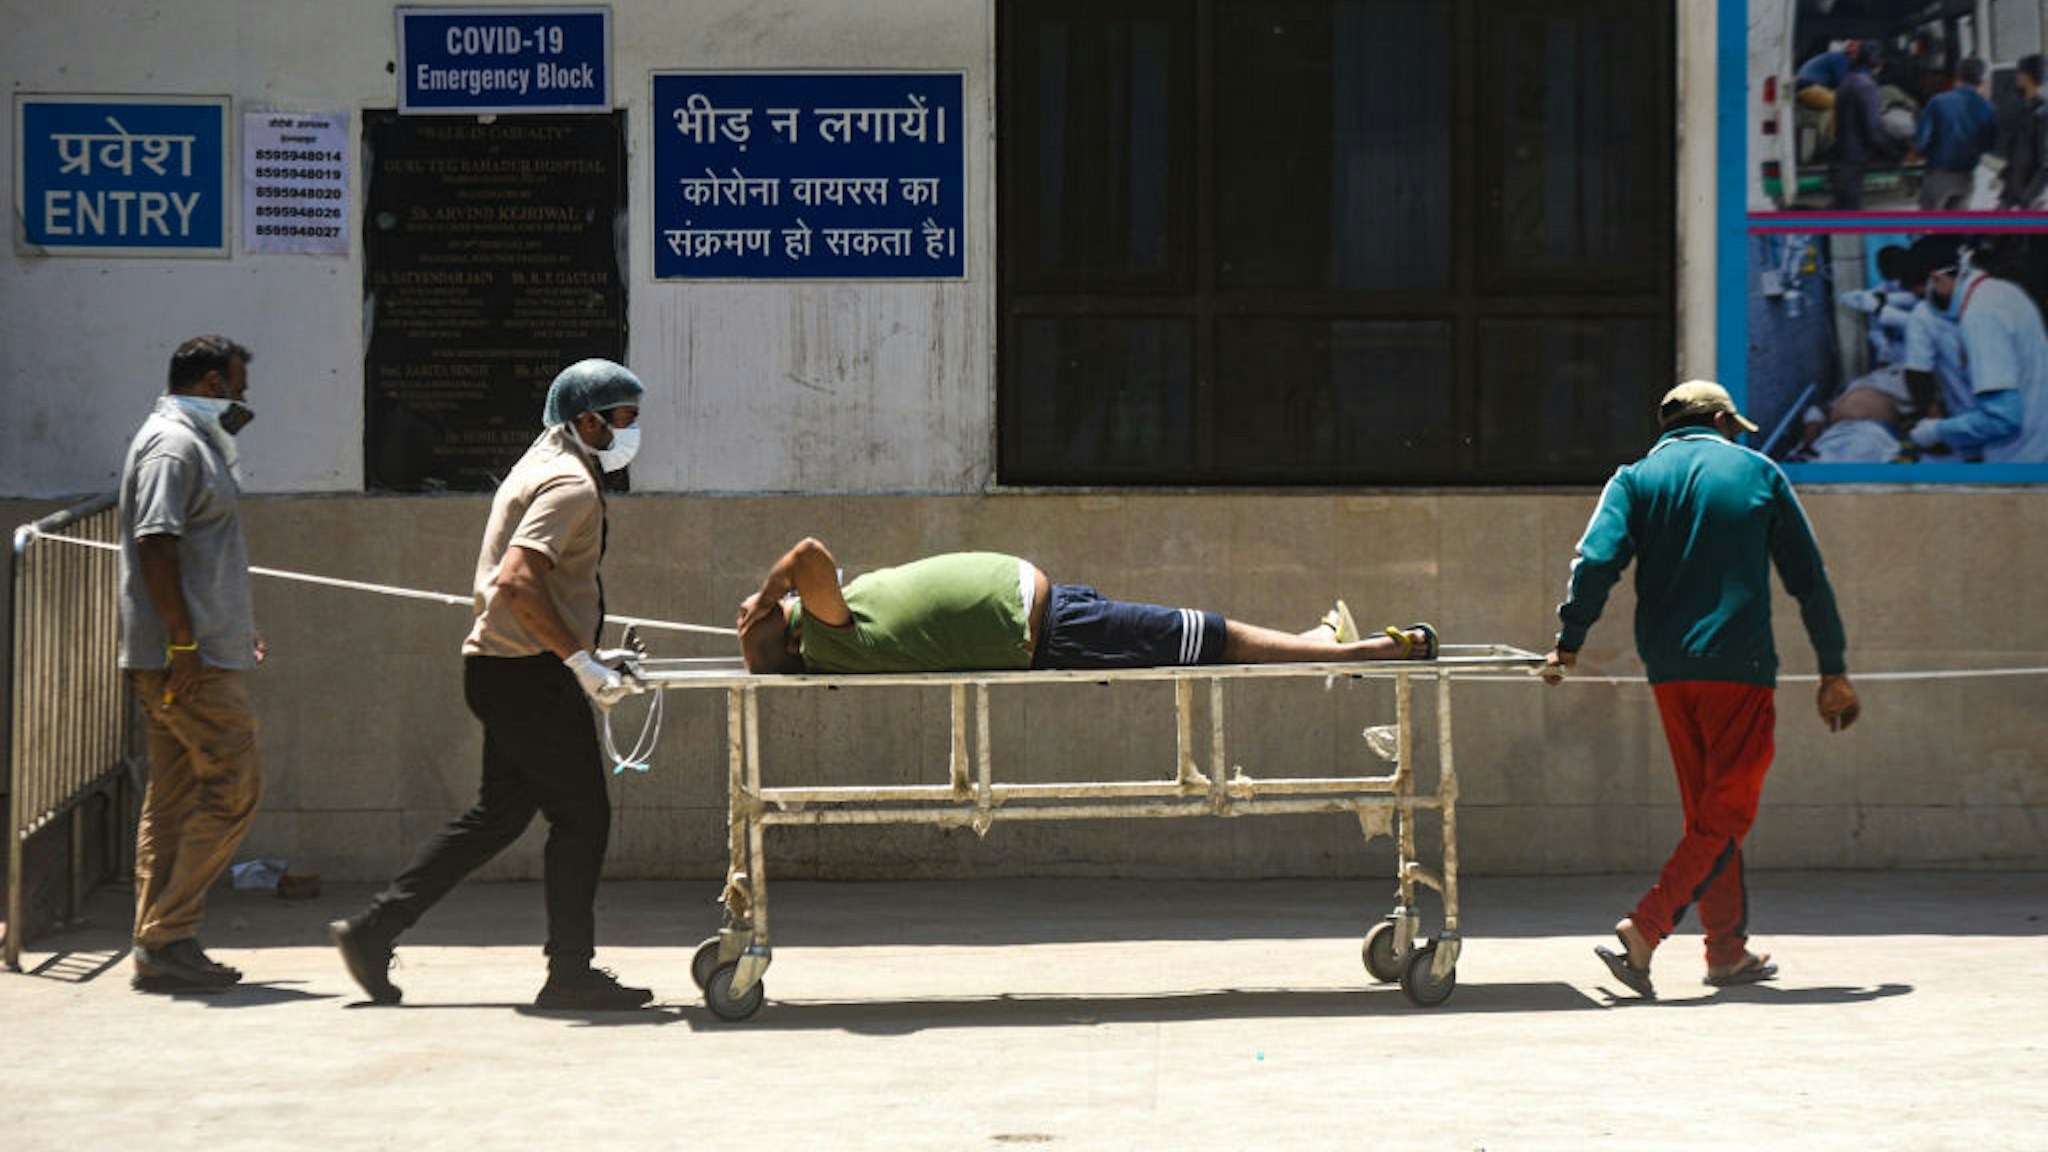 NEW DELHI, INDIA APRIL 24: Relatives carry a Covid-19 patient on a stretcher as they leave from GTB Hospital , on April 24, 2021 in New Delhi, India. (Photo by Amal KS/Hindustan Times via Getty Images)